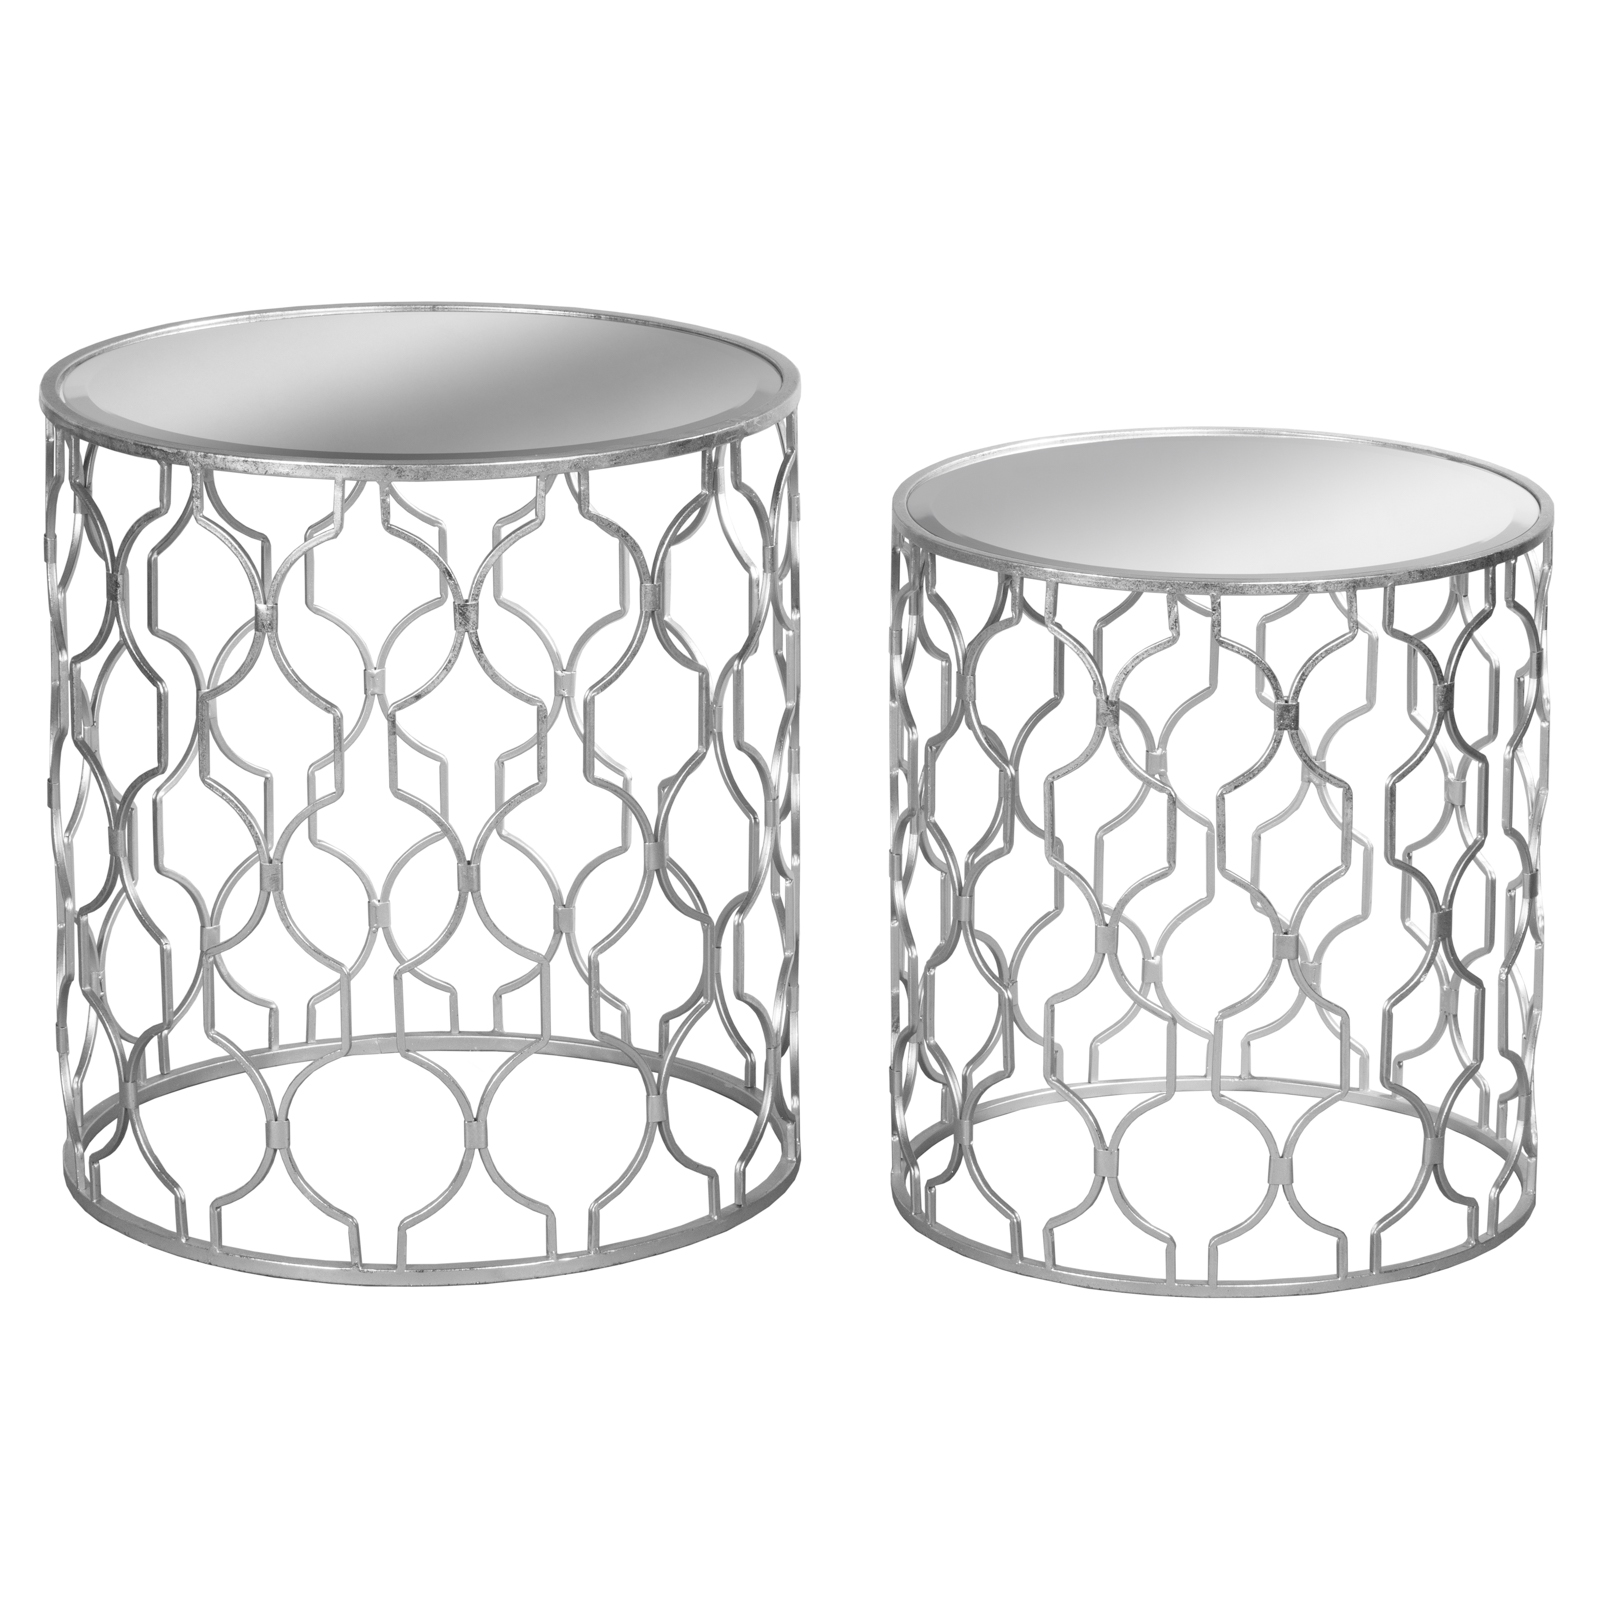 Set of Two Arabesque Silver Foil Mirrored Side Tables - Image 1